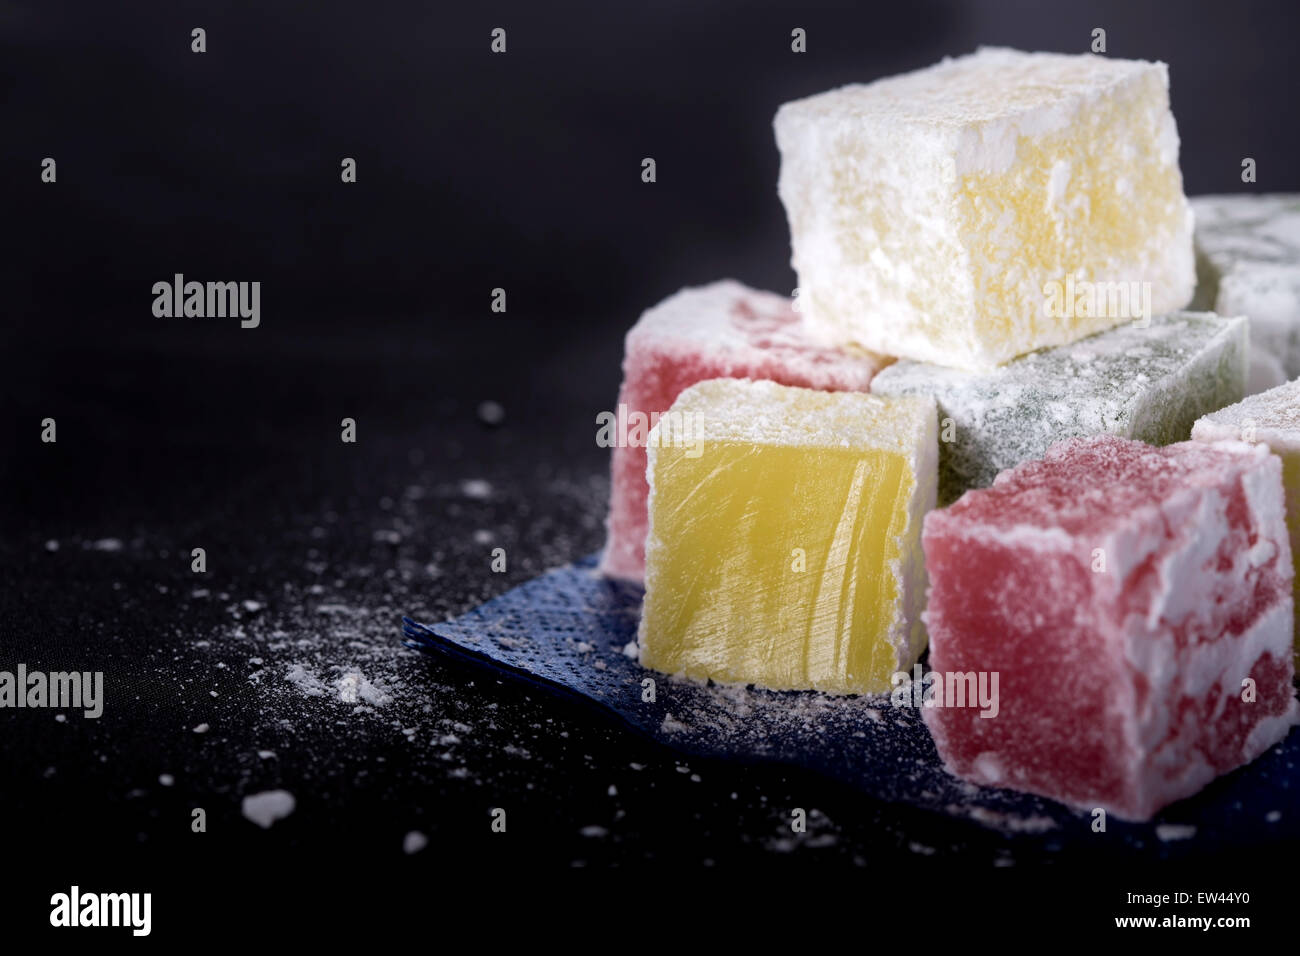 Turkish delight pieces on blue paper napkin over black background Stock Photo